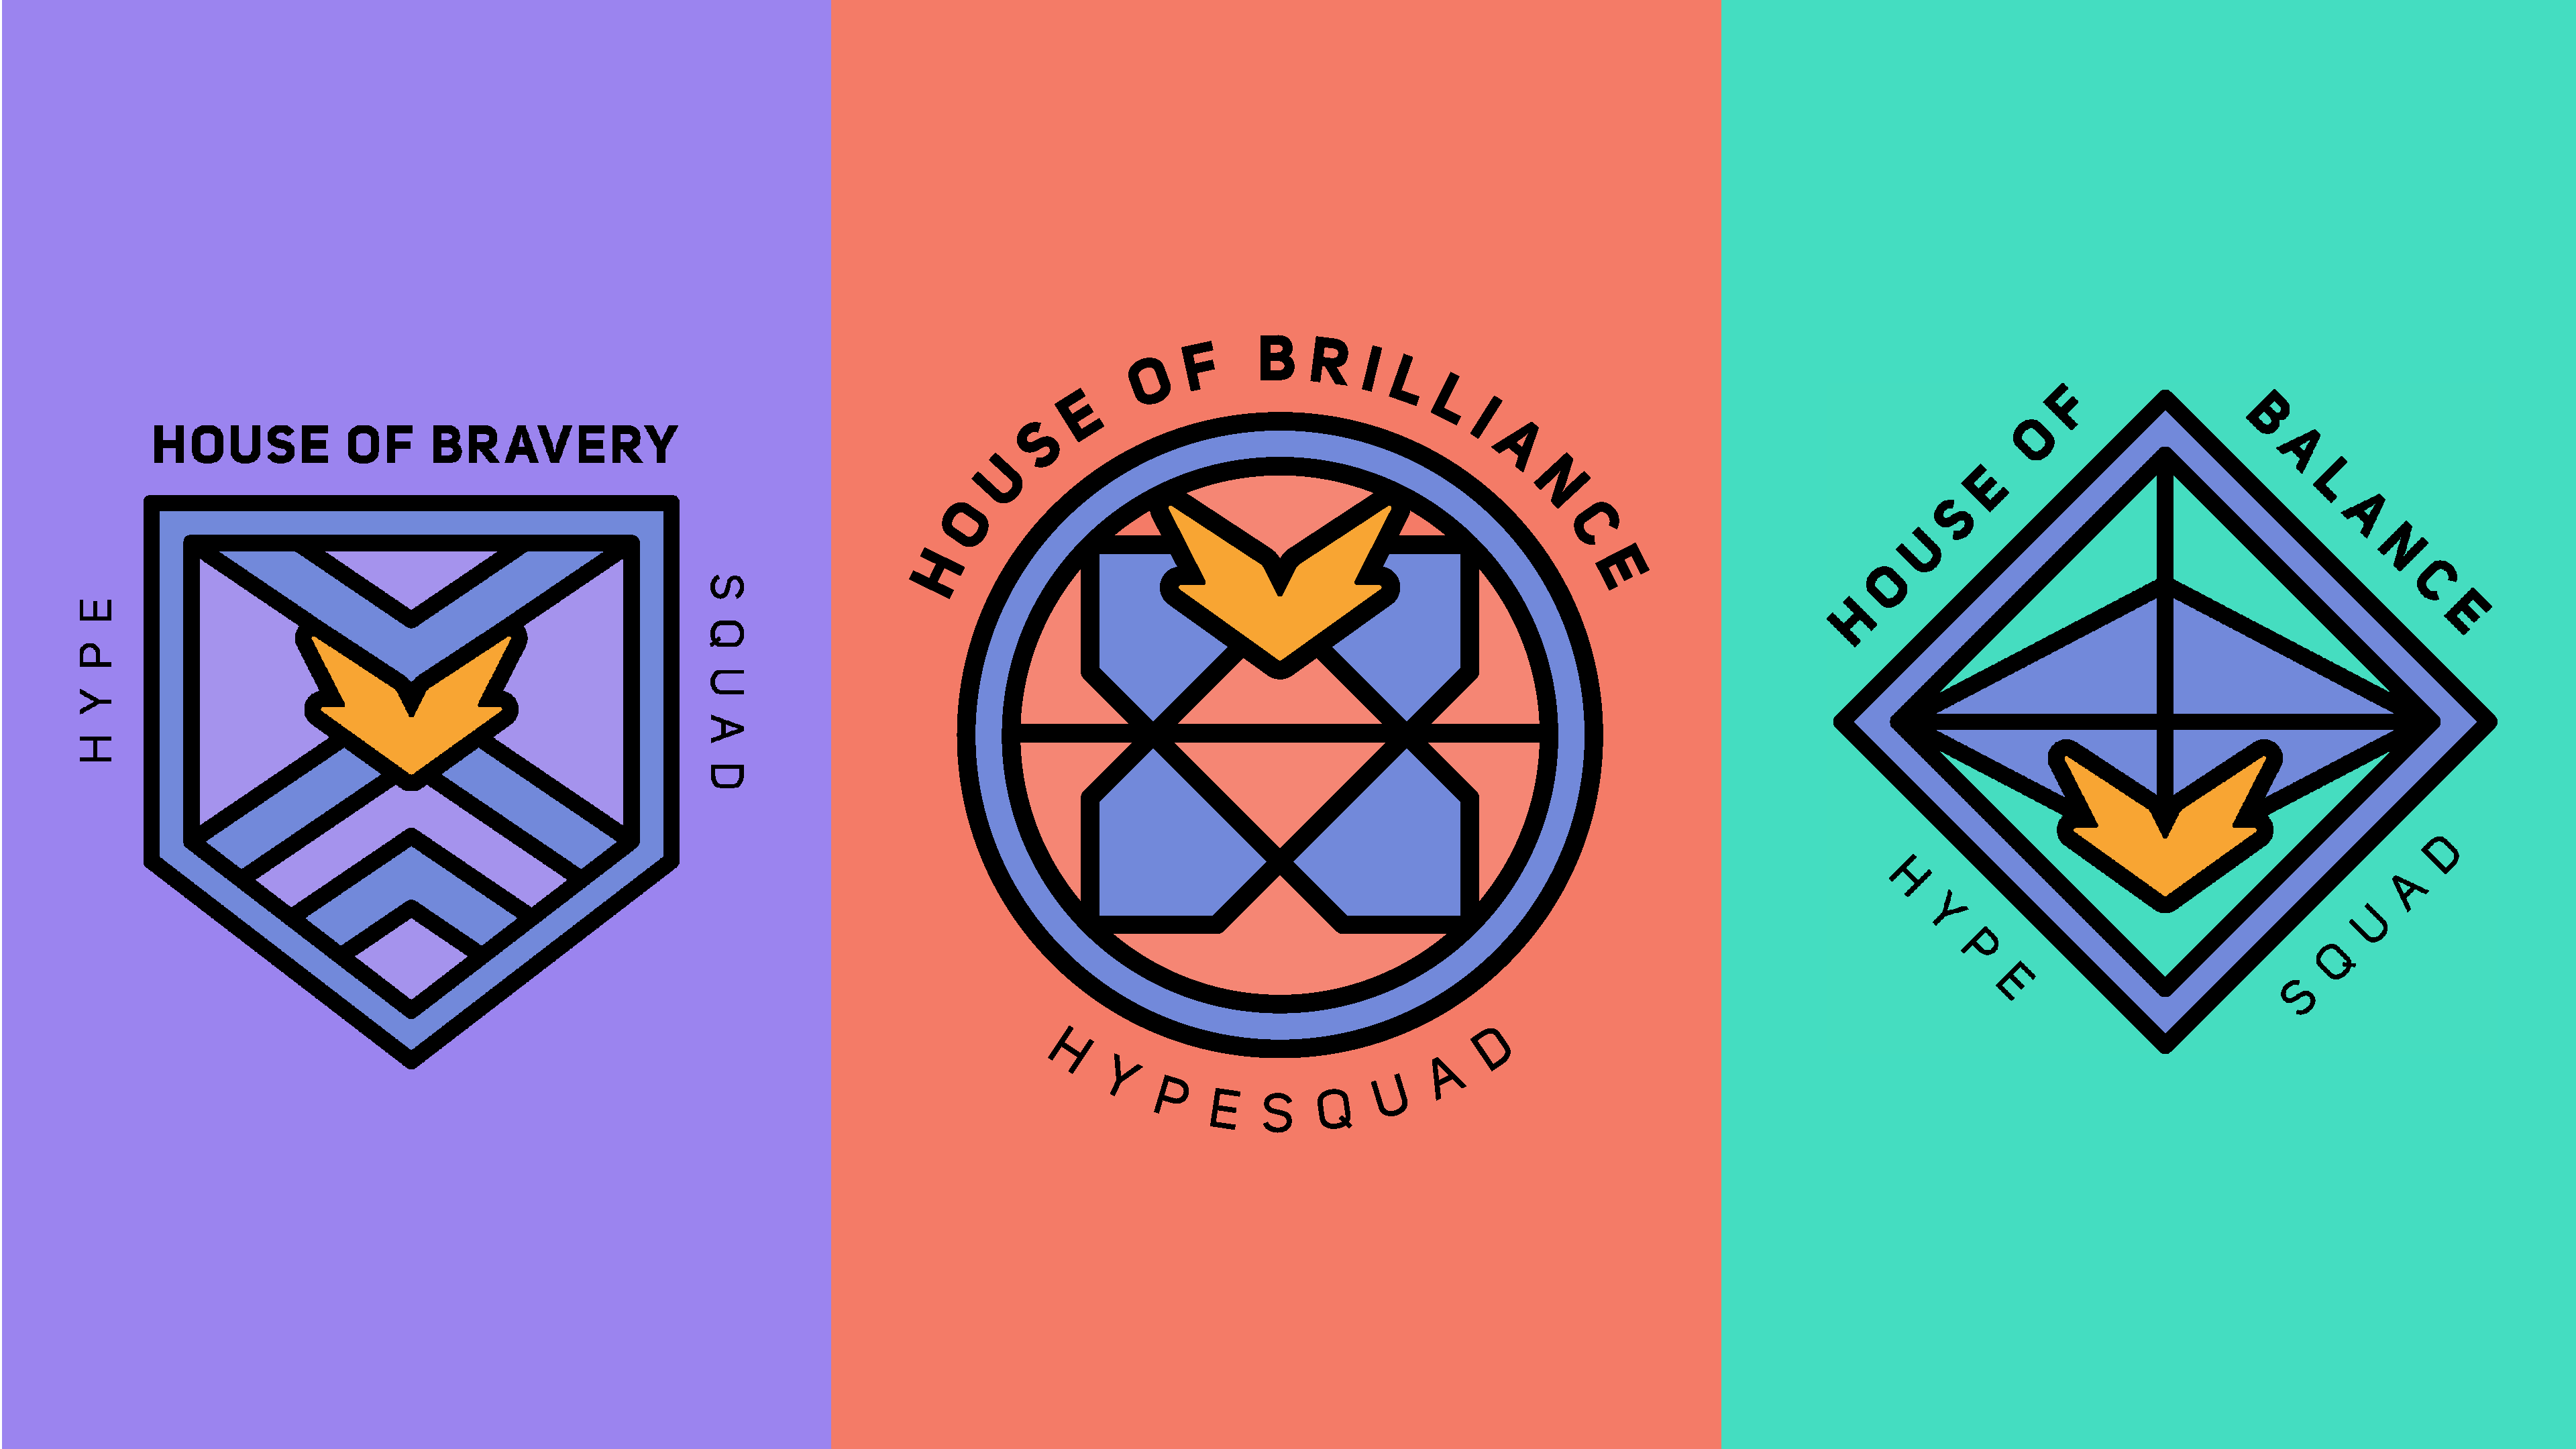 Made a few wallpaper / colored versions of the discord hypesquad badges!